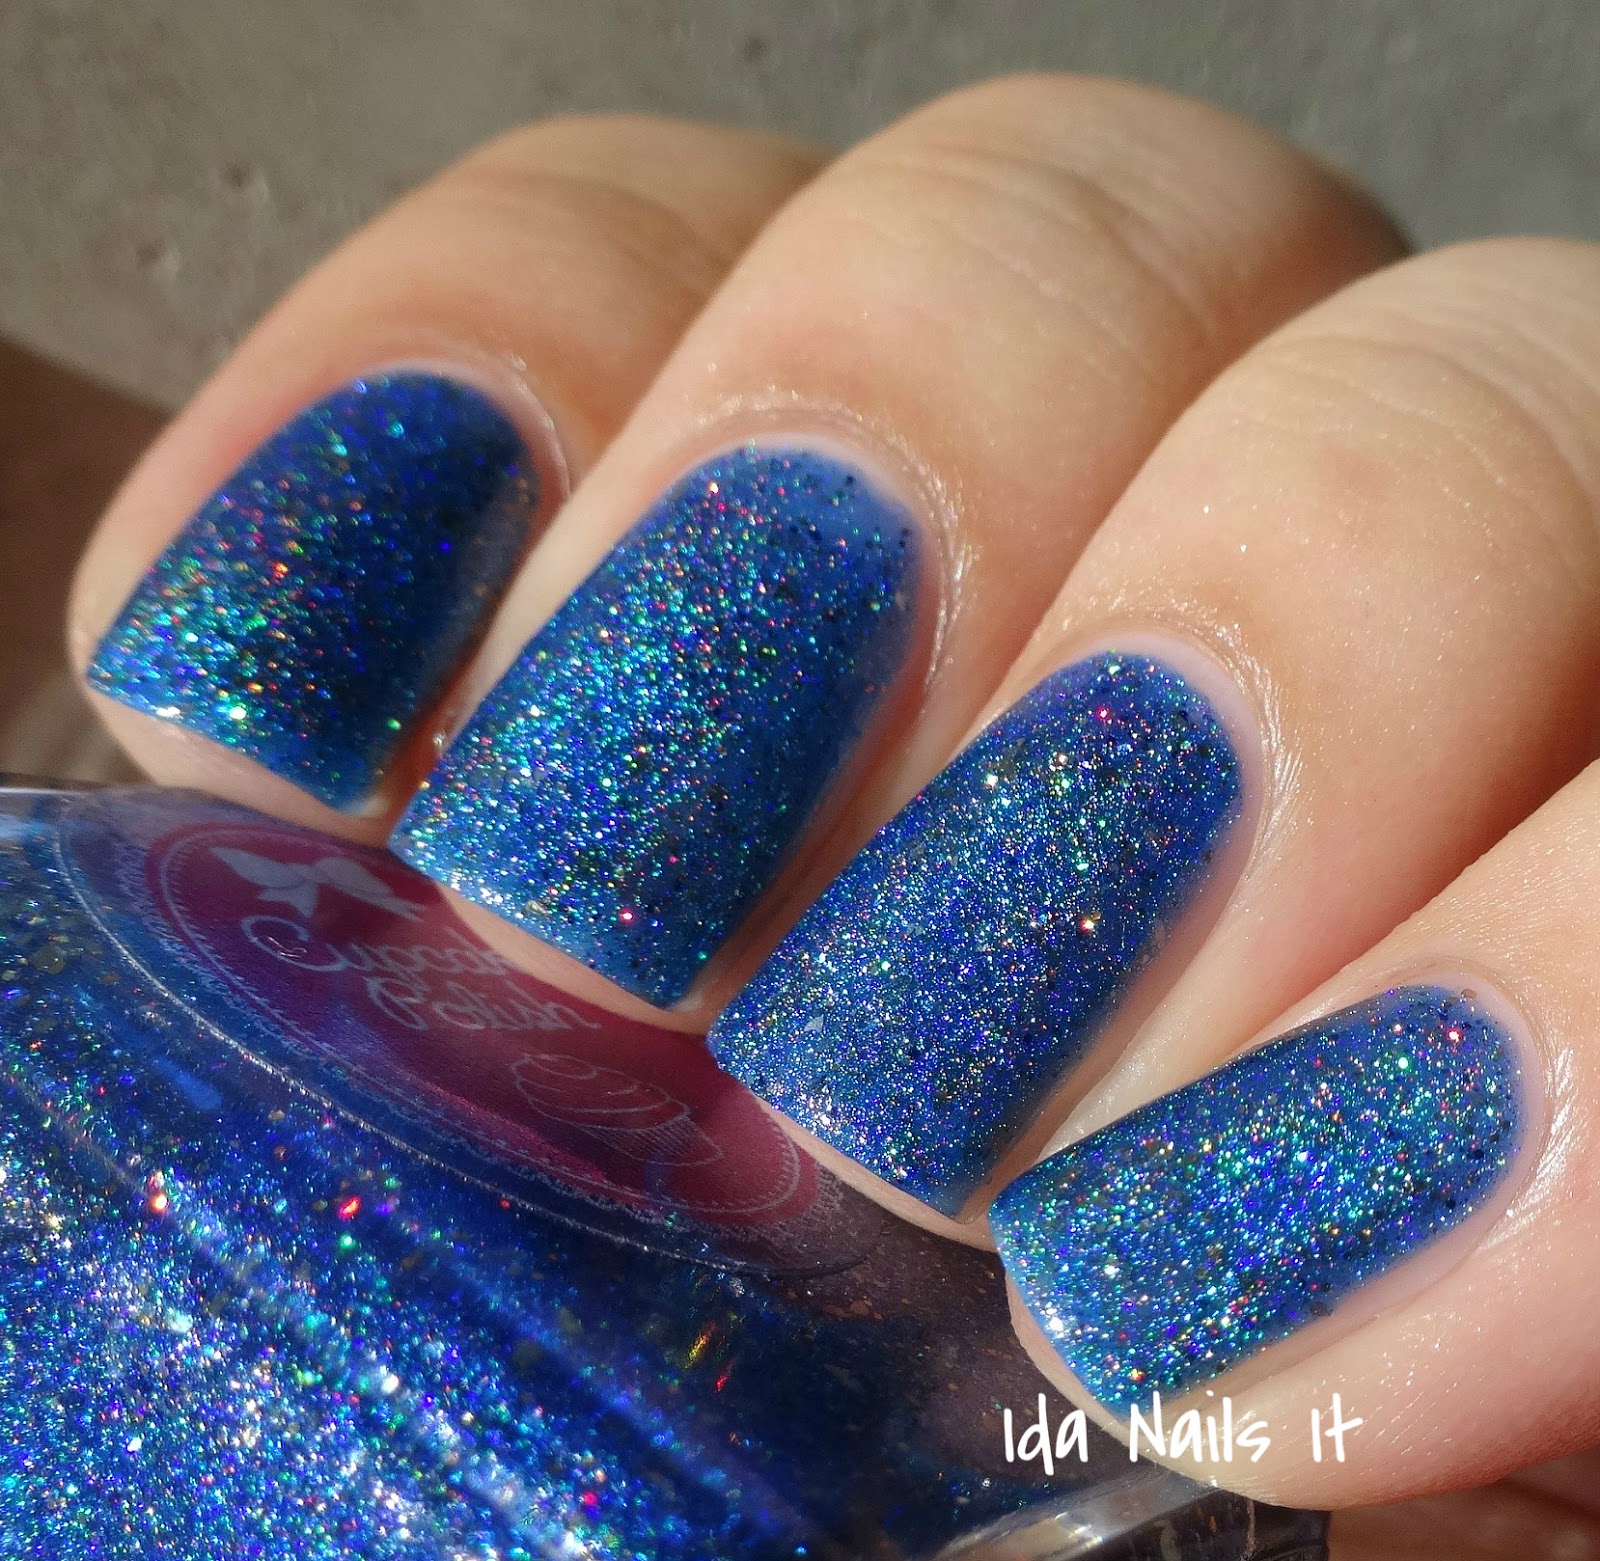 Ida Nails It: Cupcake Polish Holiday 2014 Collection: Swatches and Review